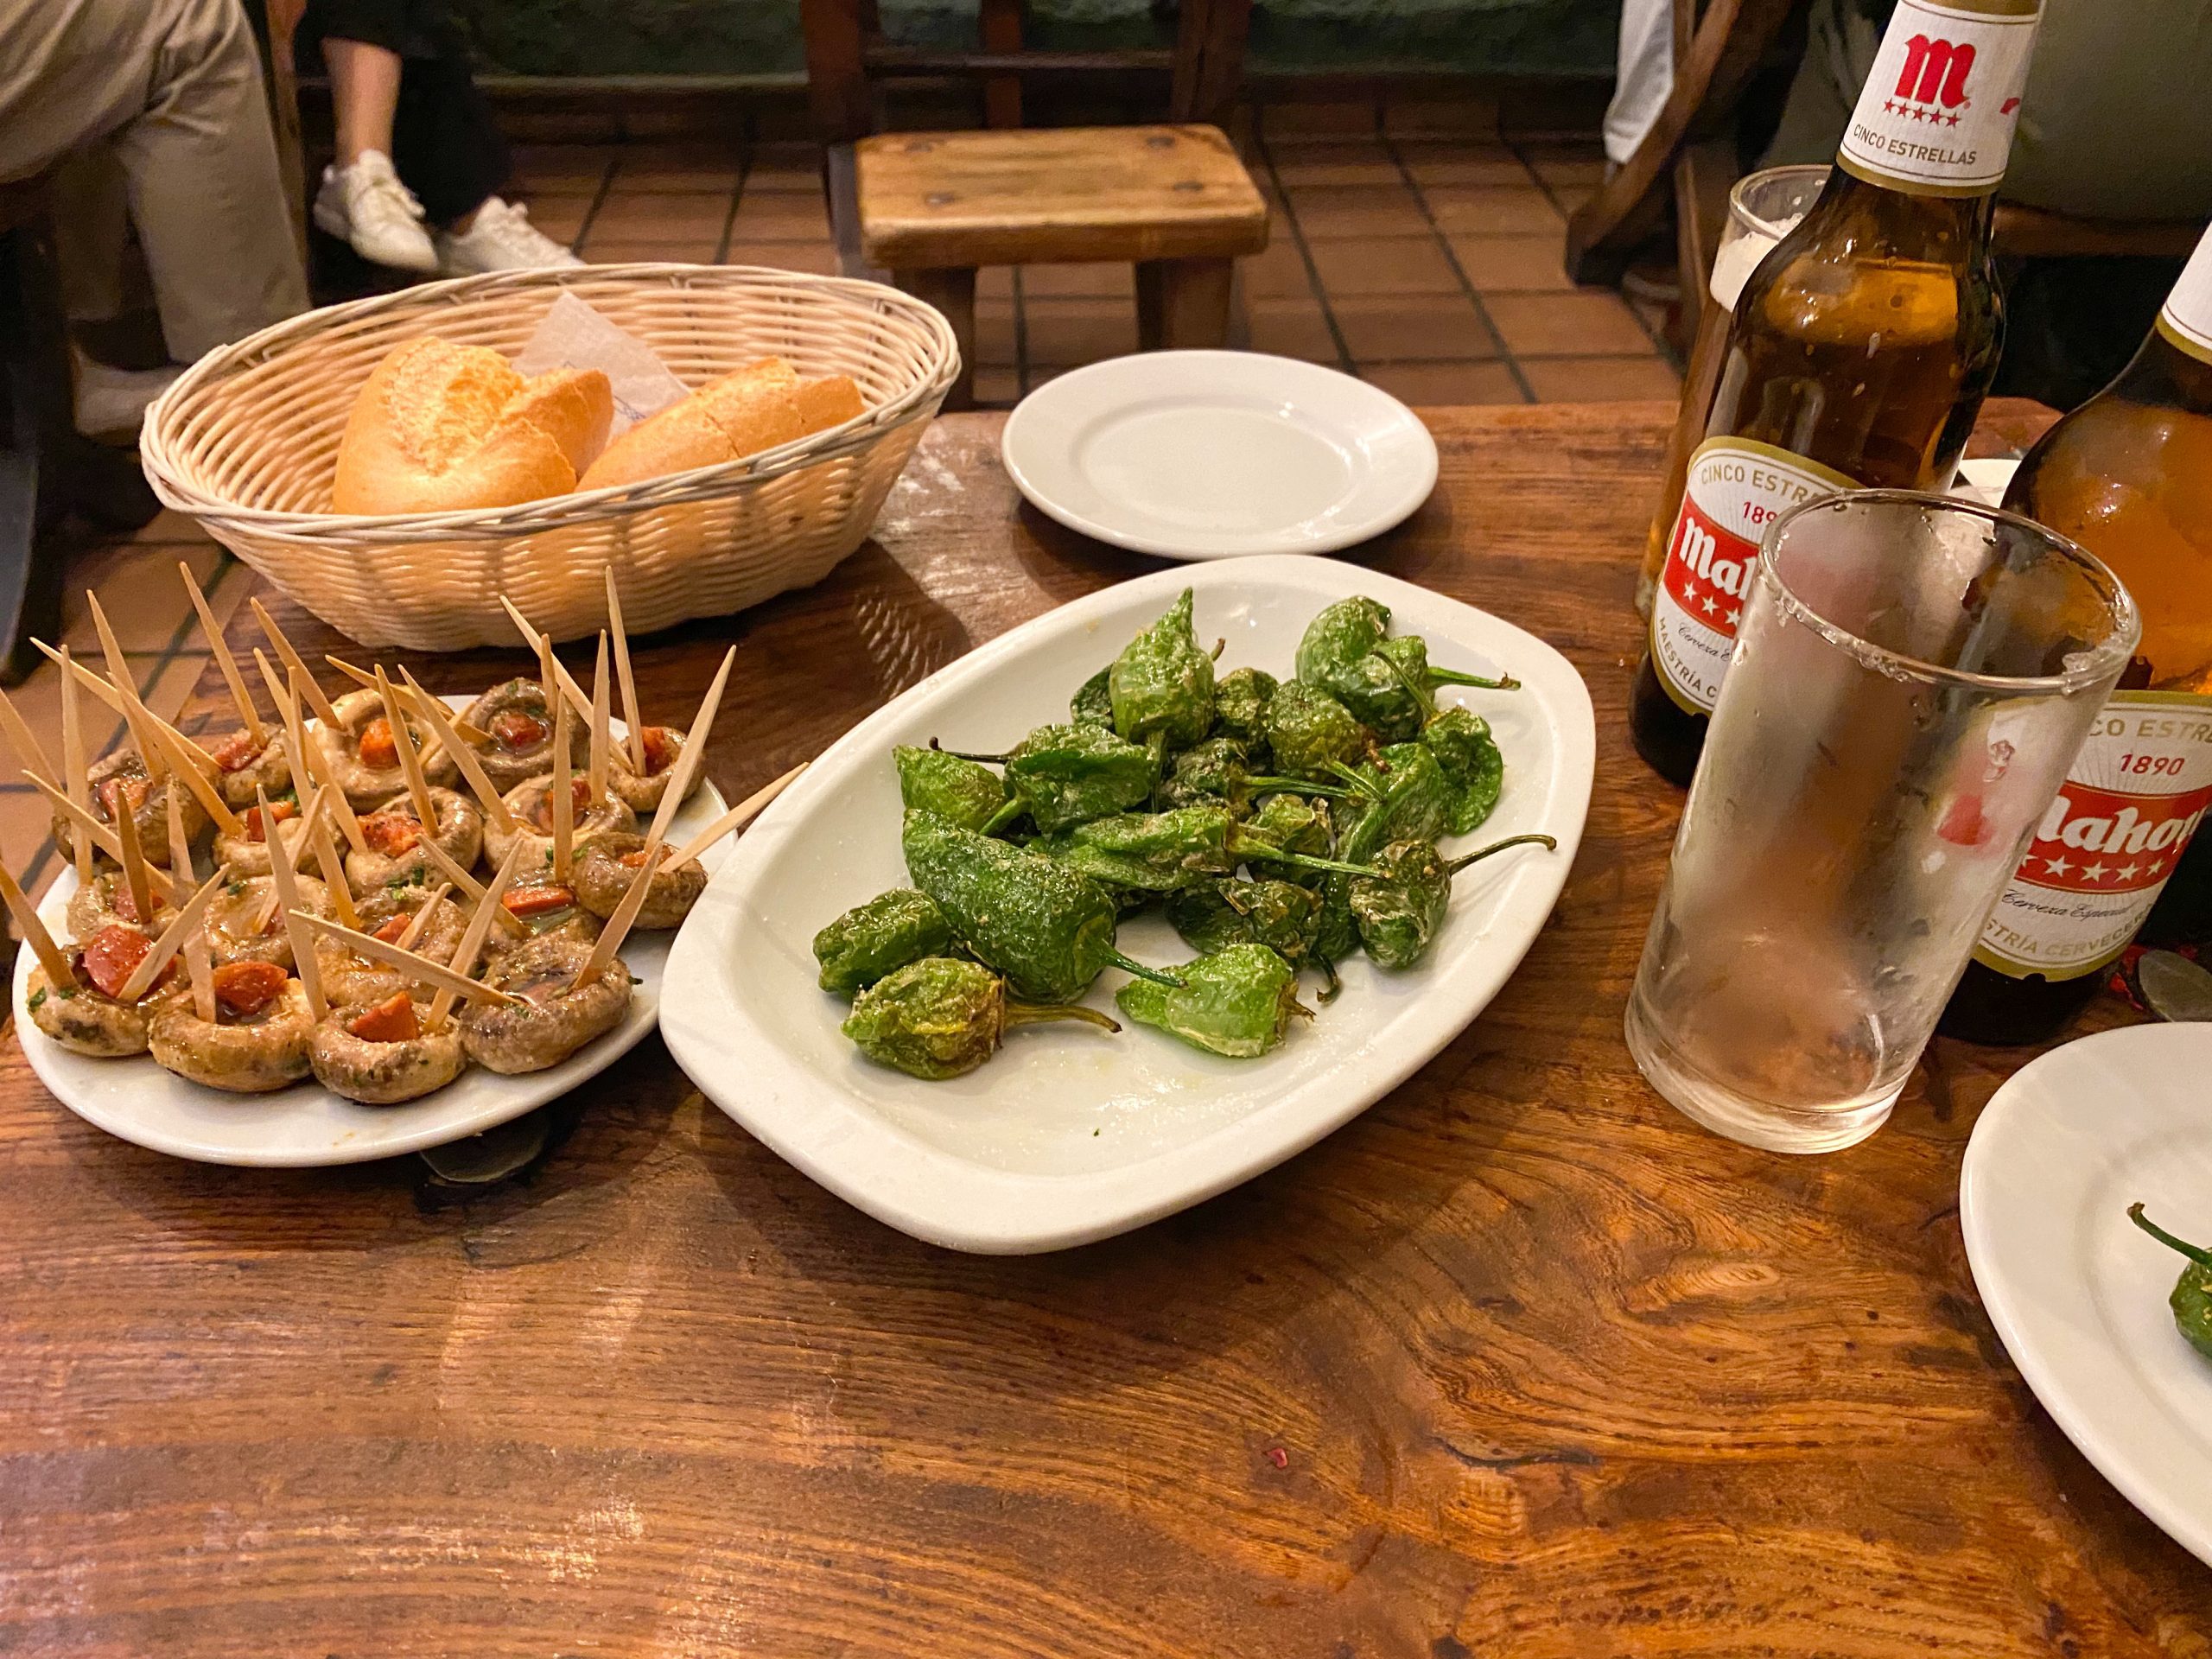 A plate of stuffed button mushrooms and a plate of green salted peppers on a wooden table with some bottles of beer and a bread basket. 